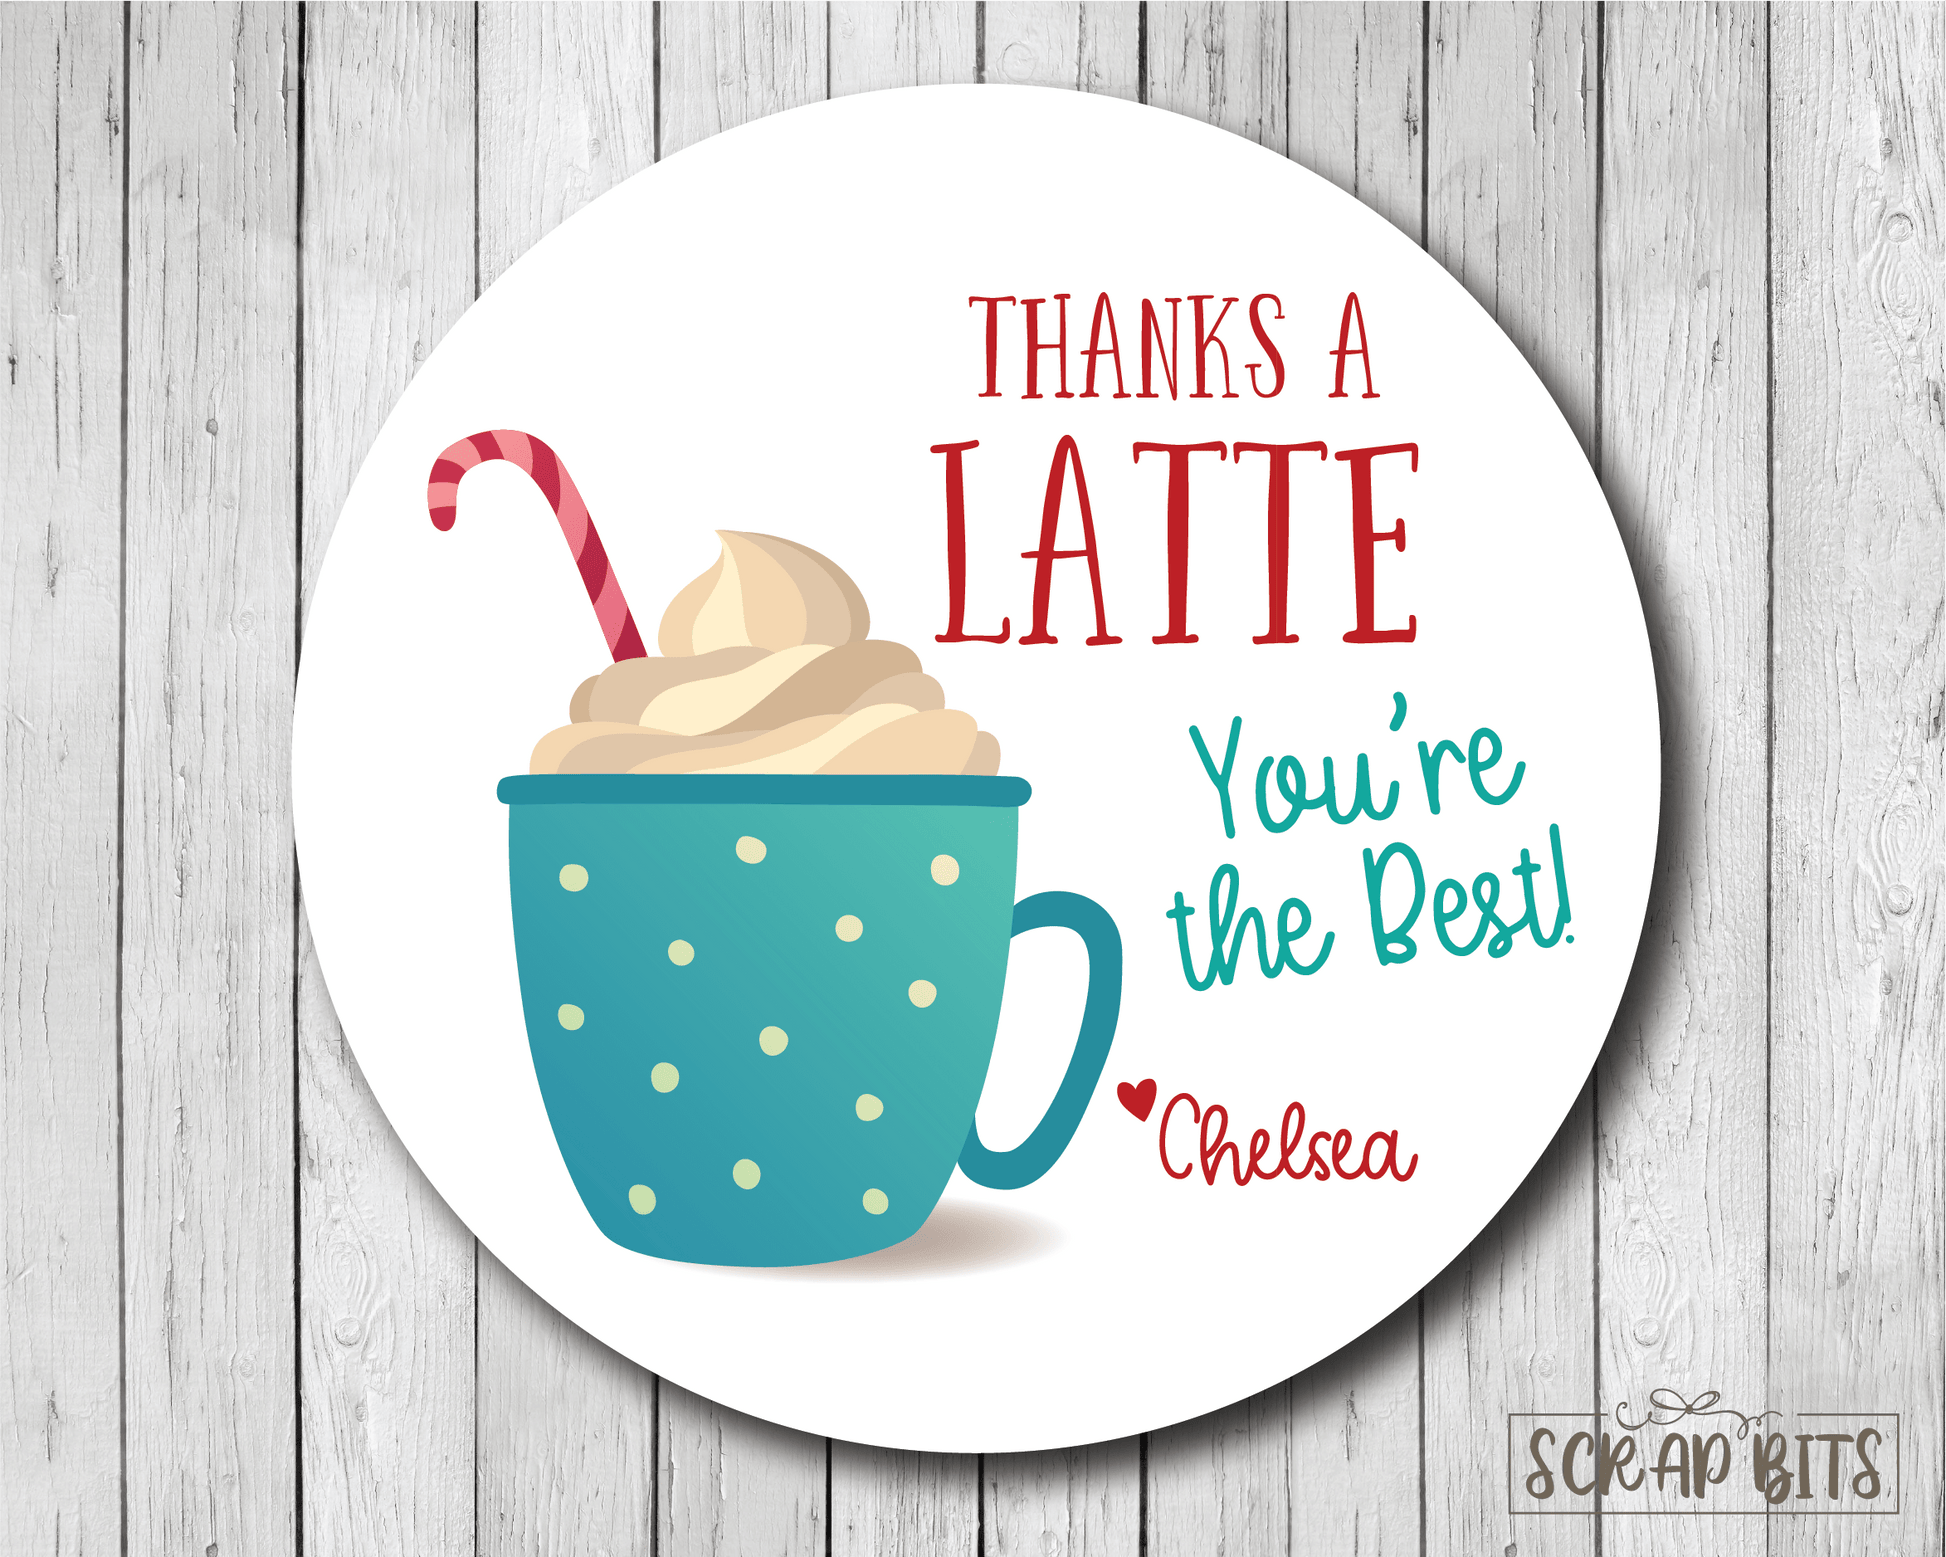 Thanks a Latte Mug Stickers or Tags . Personalized Thank You Stickers - Scrap Bits